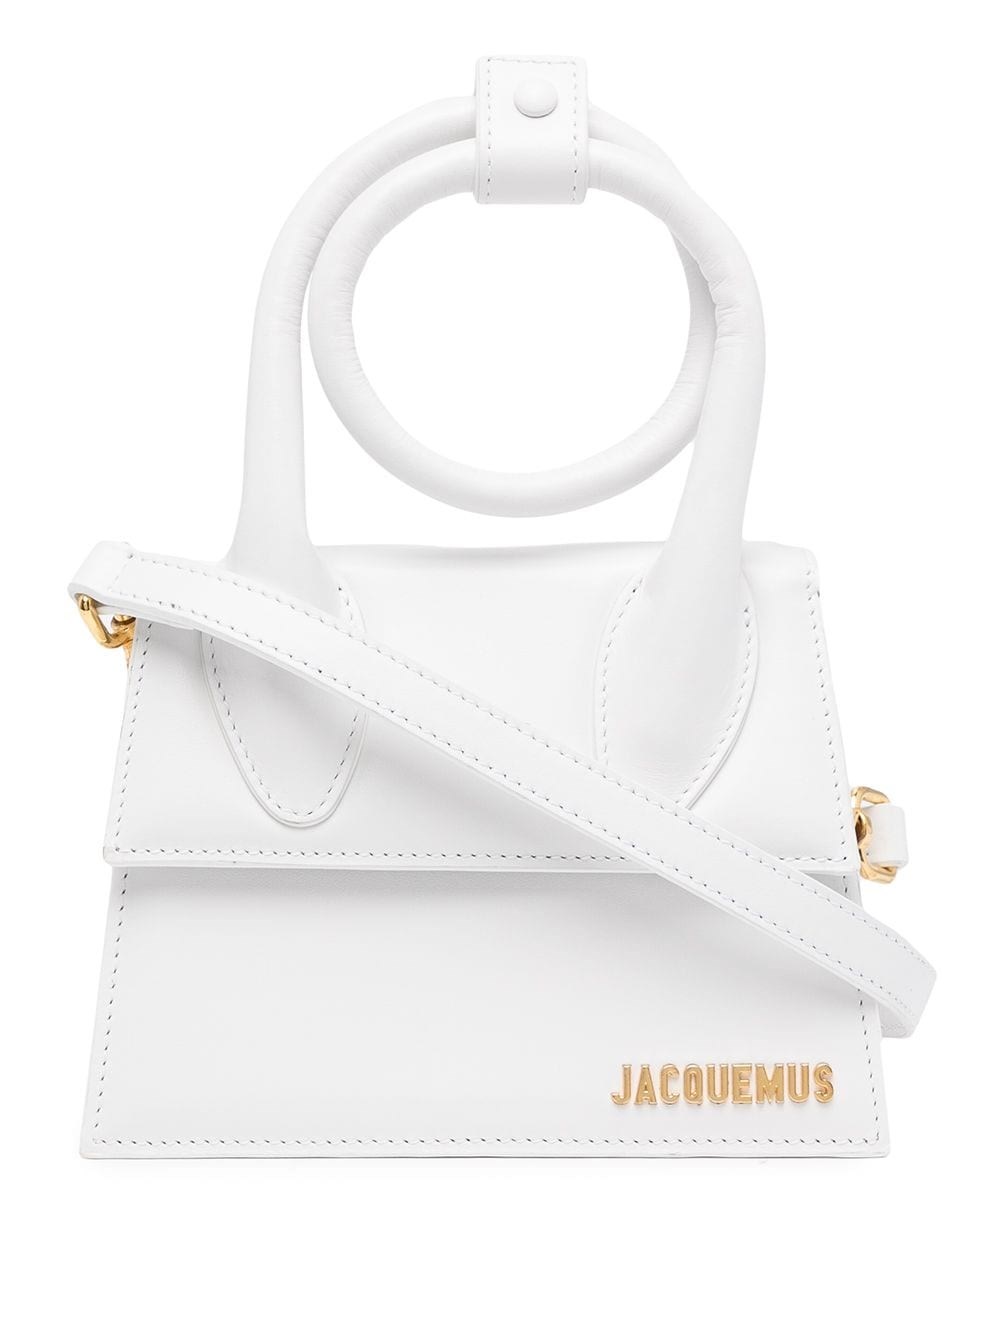 Jacquemus "le Chiquito Noeud" Bag In White